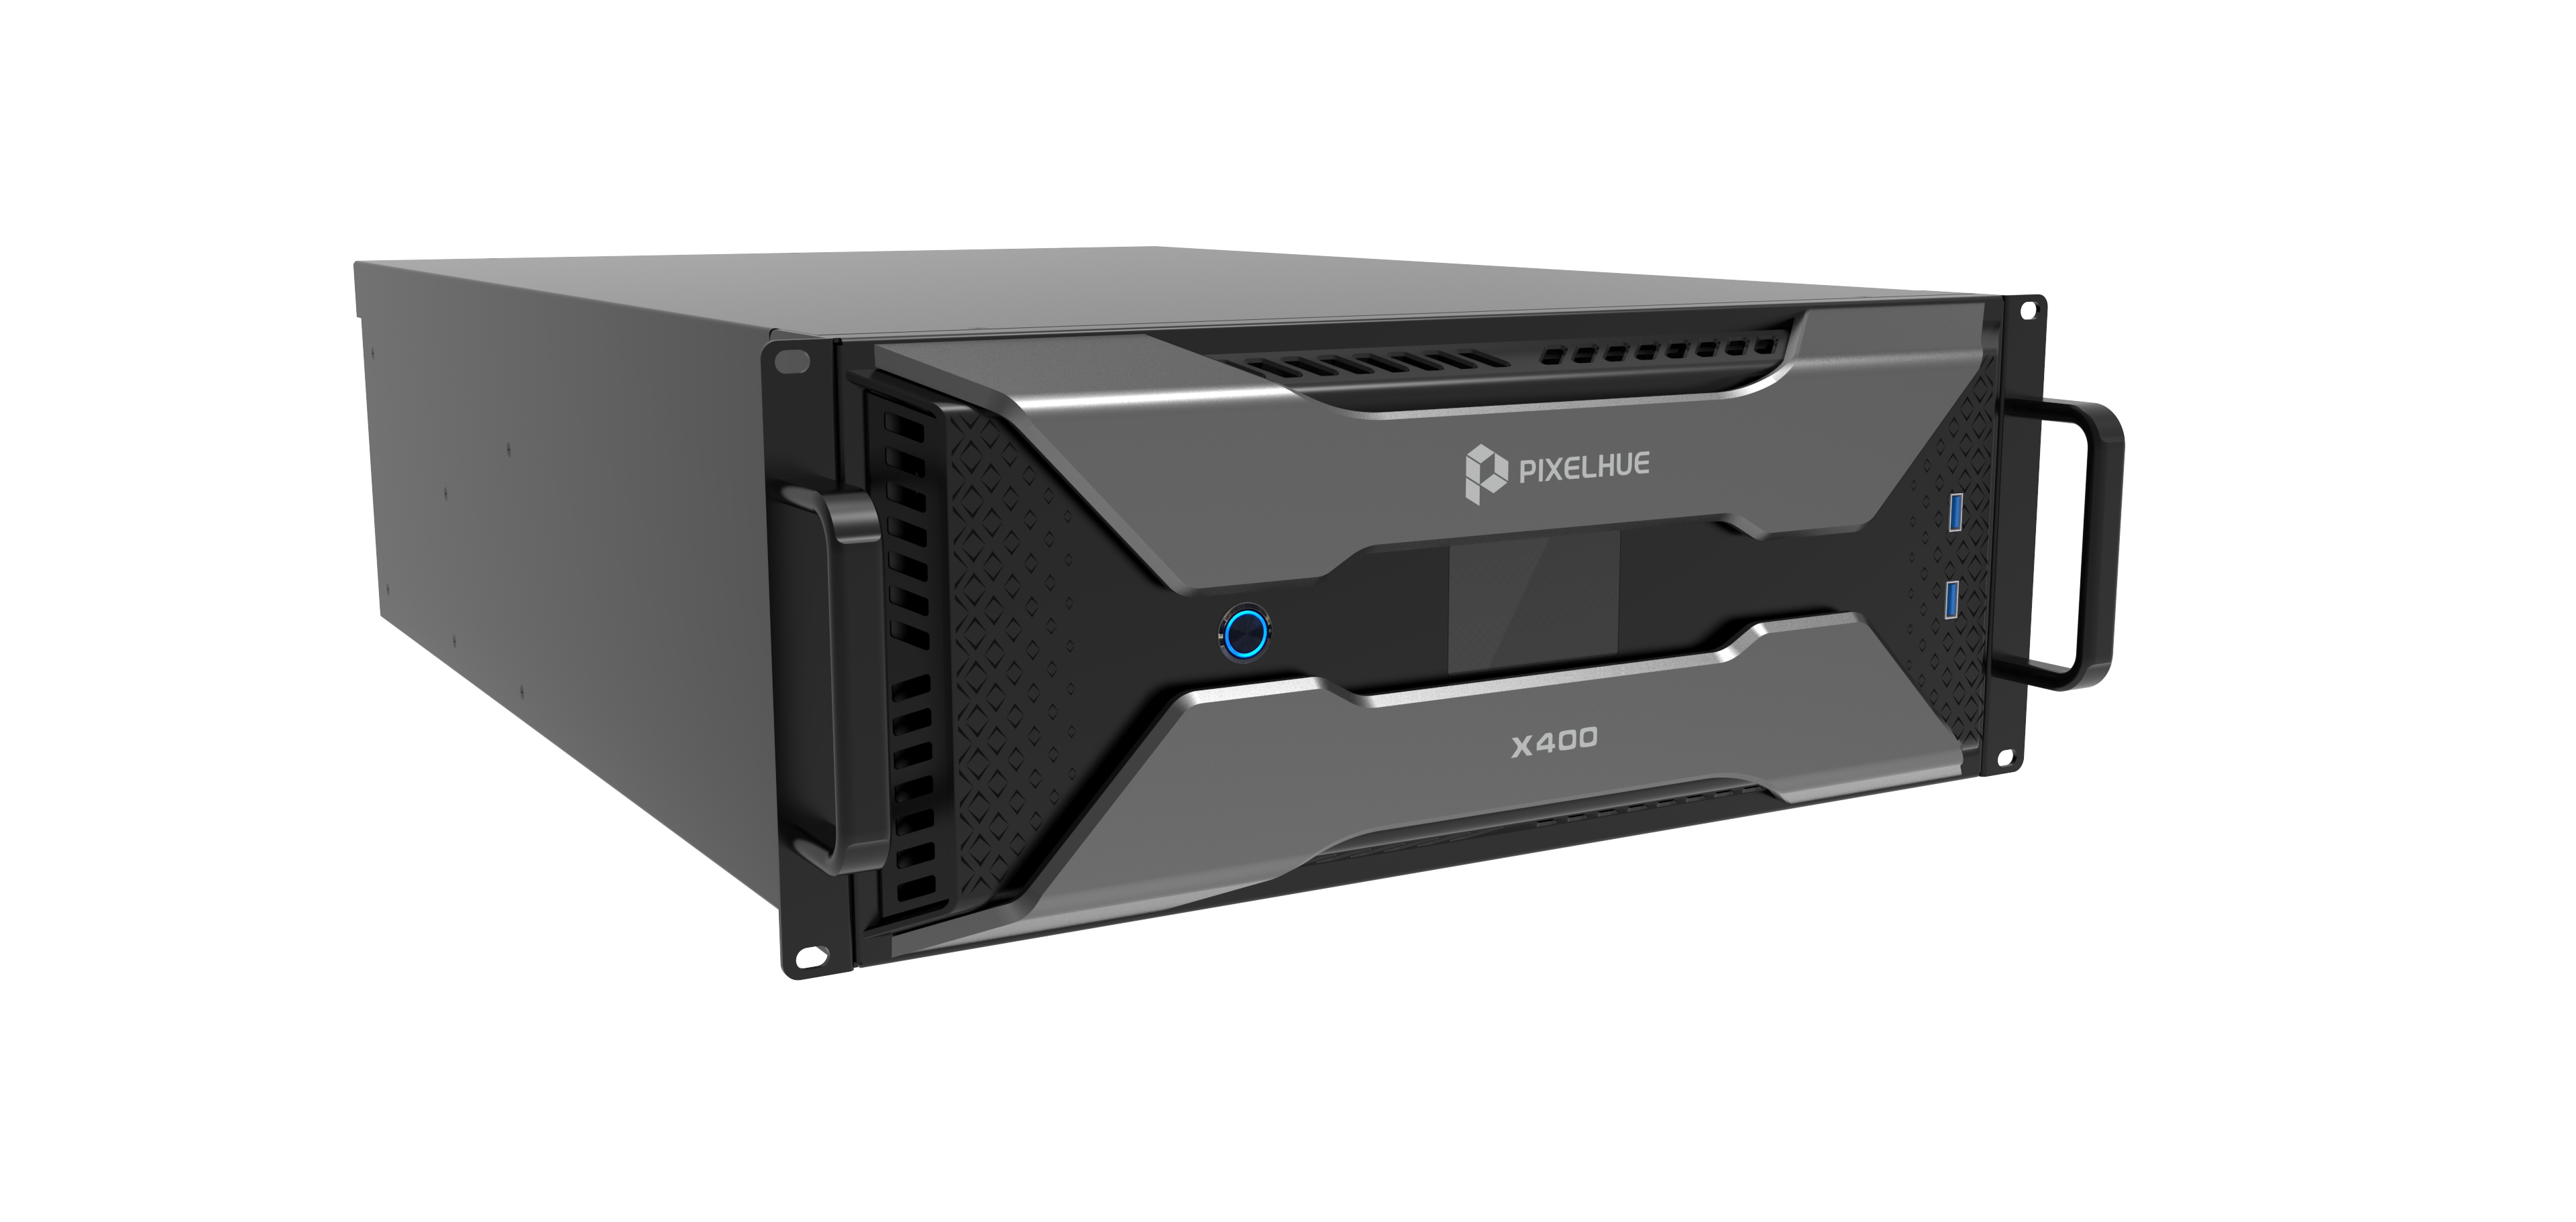 Front view of the PIXELHUE X400 media server